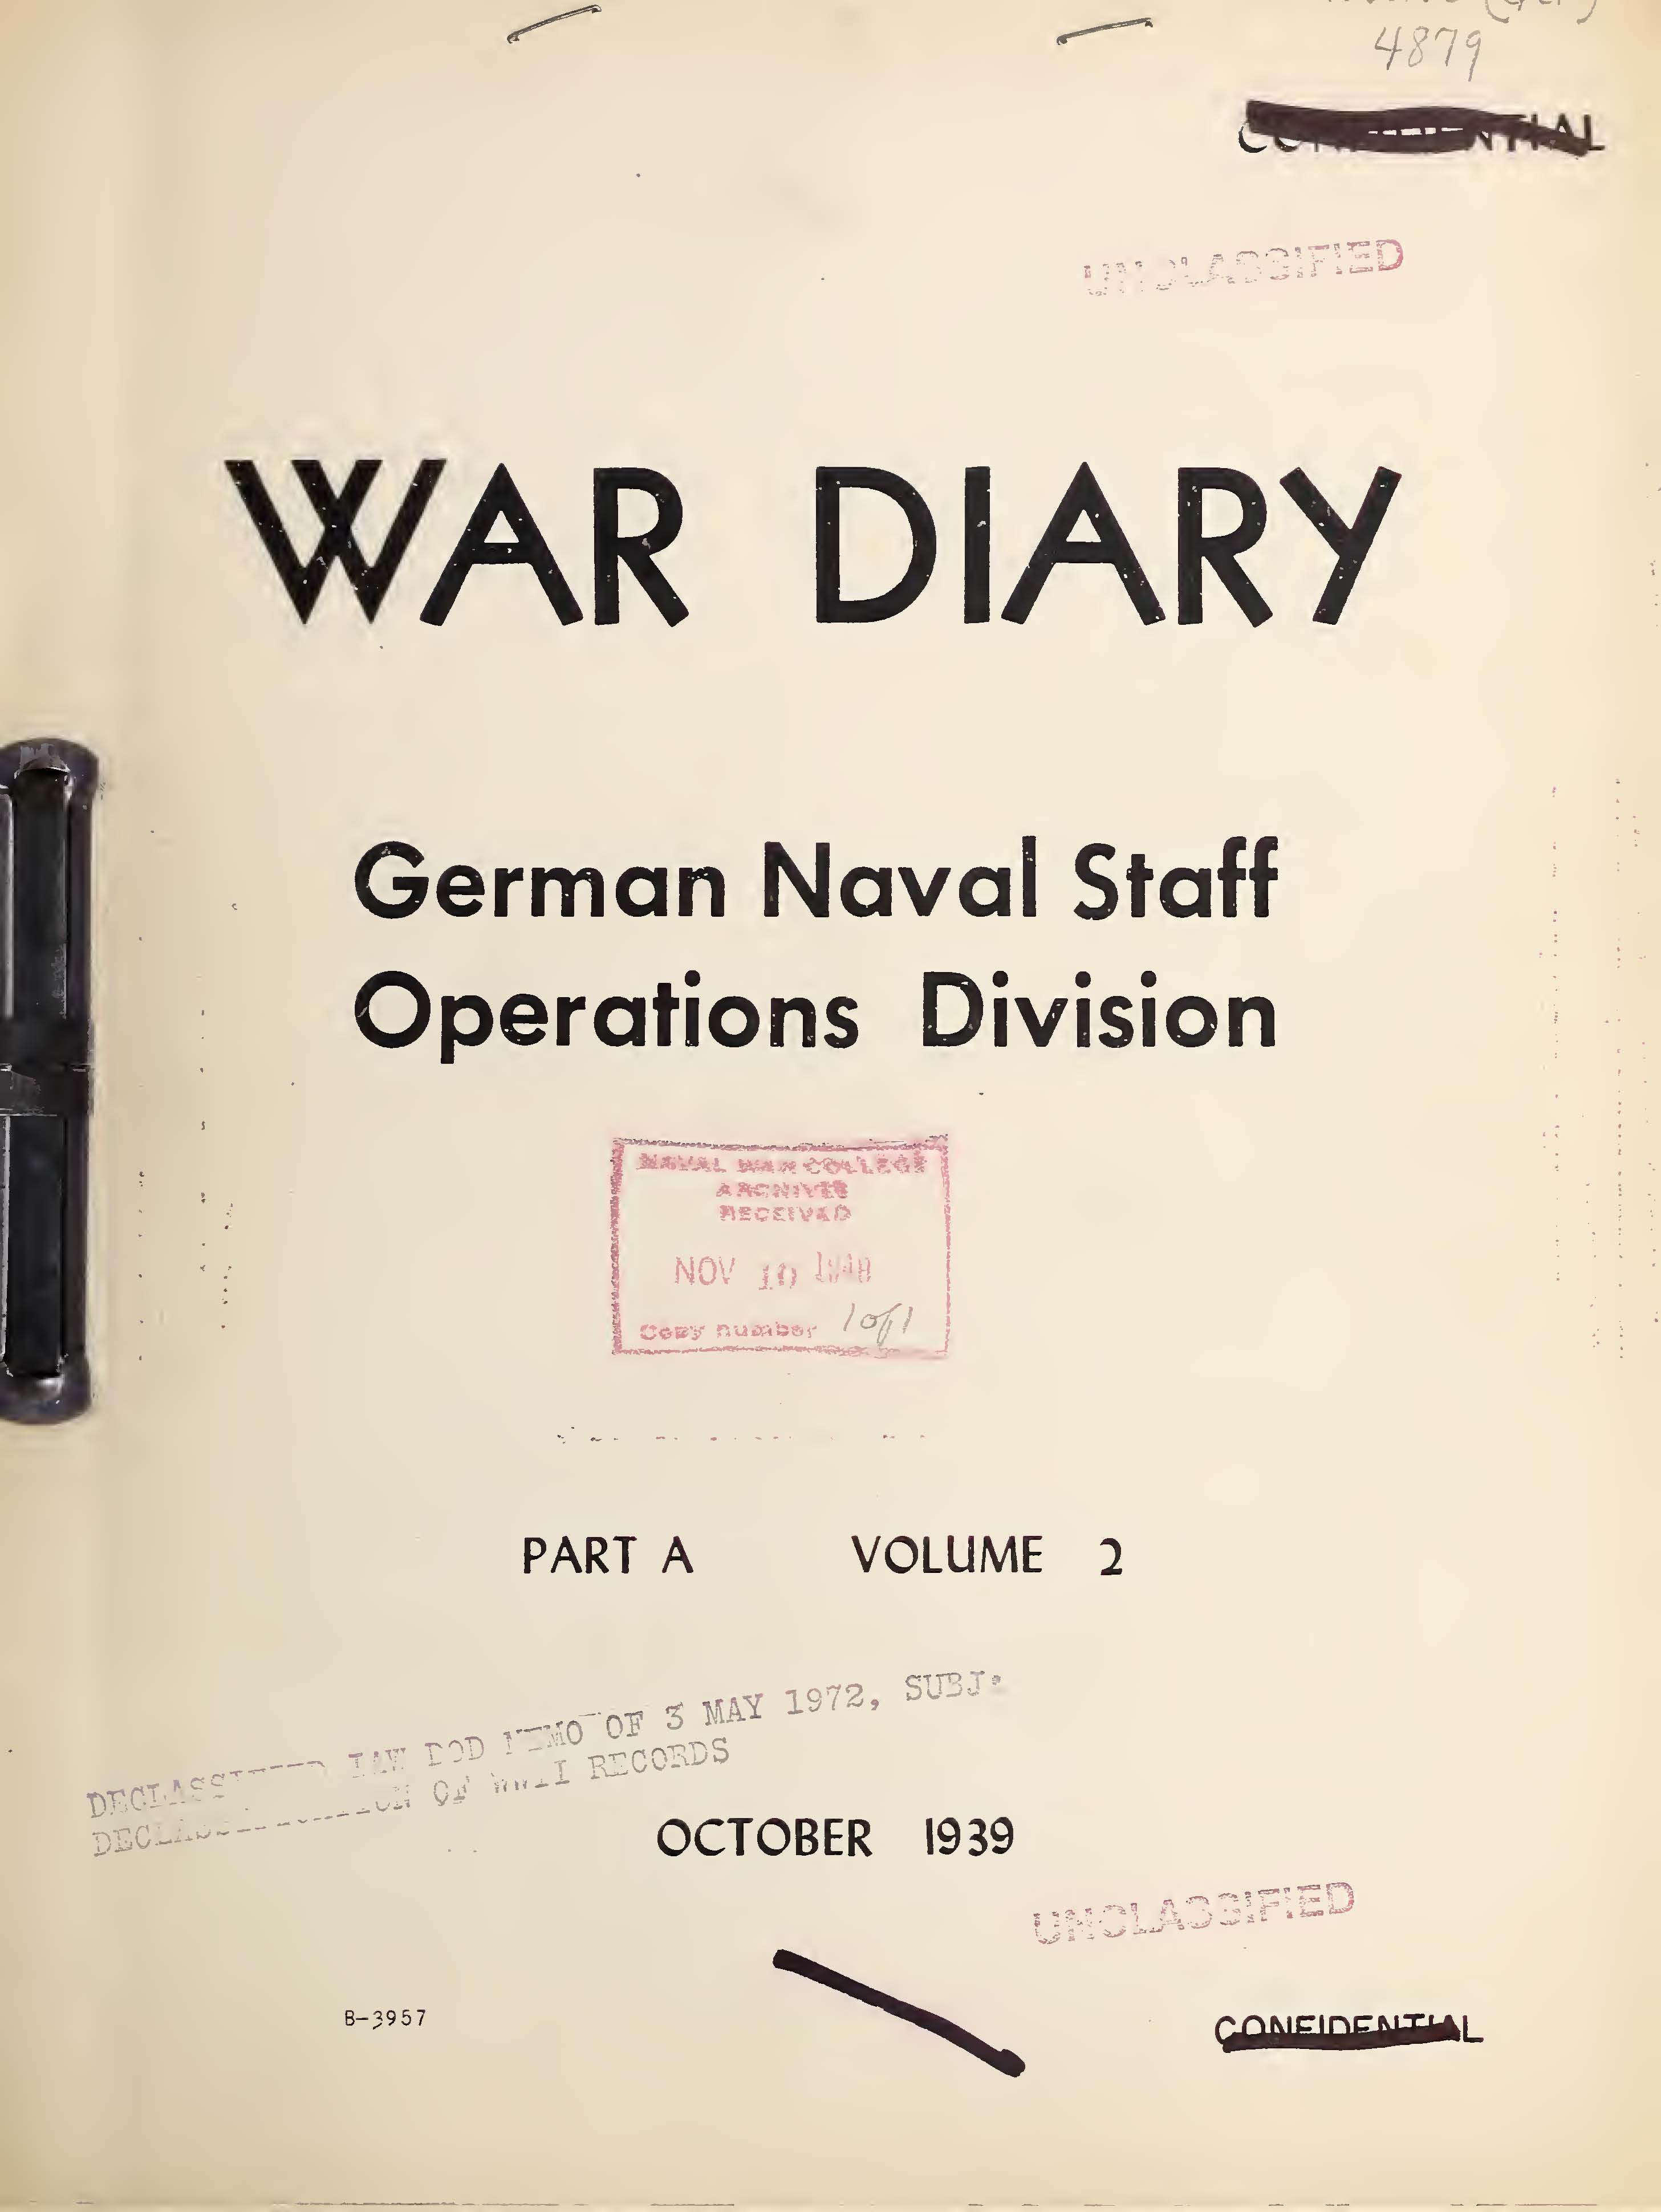 War Diary of German Naval Staff (Operations Division) Part A, Volume 2, October 1939